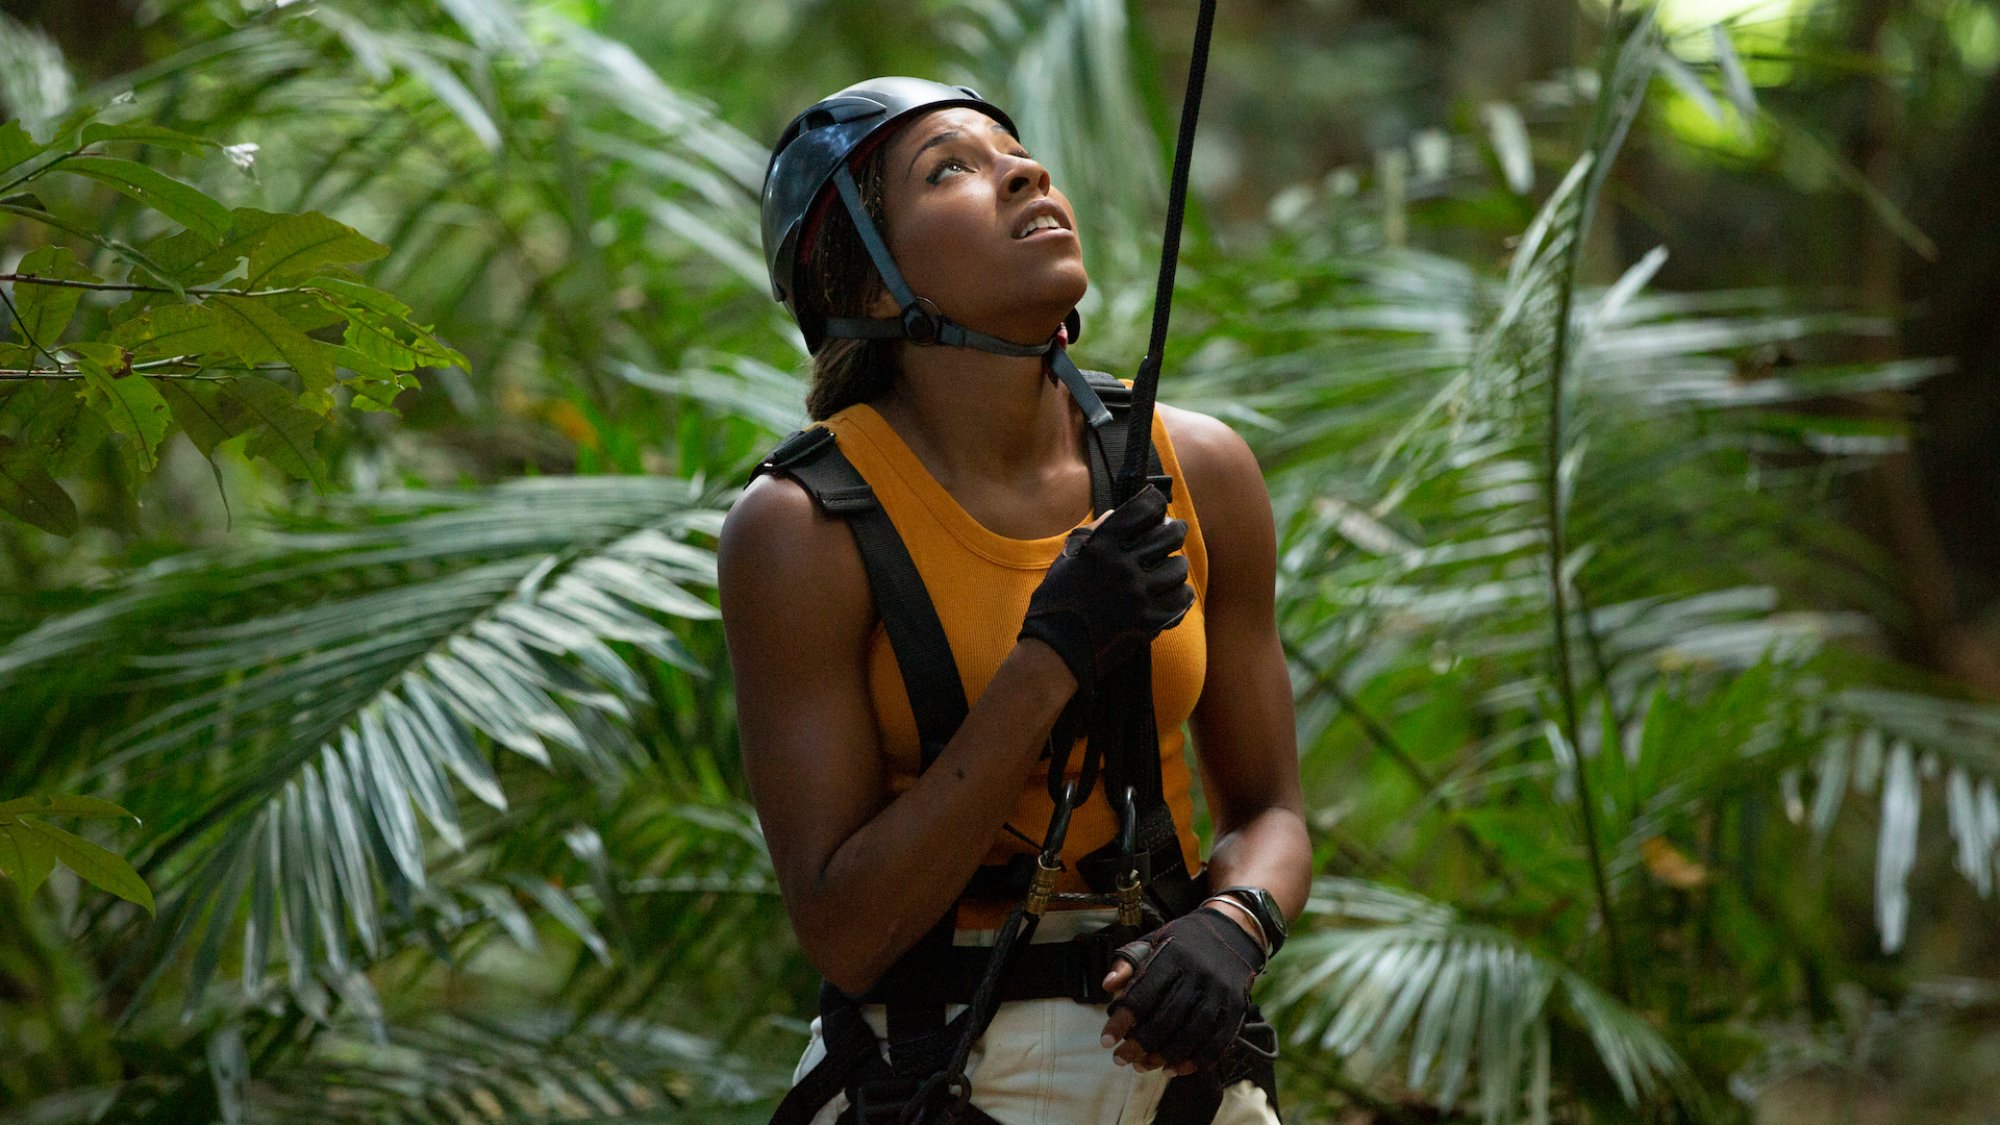 In a rainforest, a woman wearing climbing gear holds a rope and looks up.